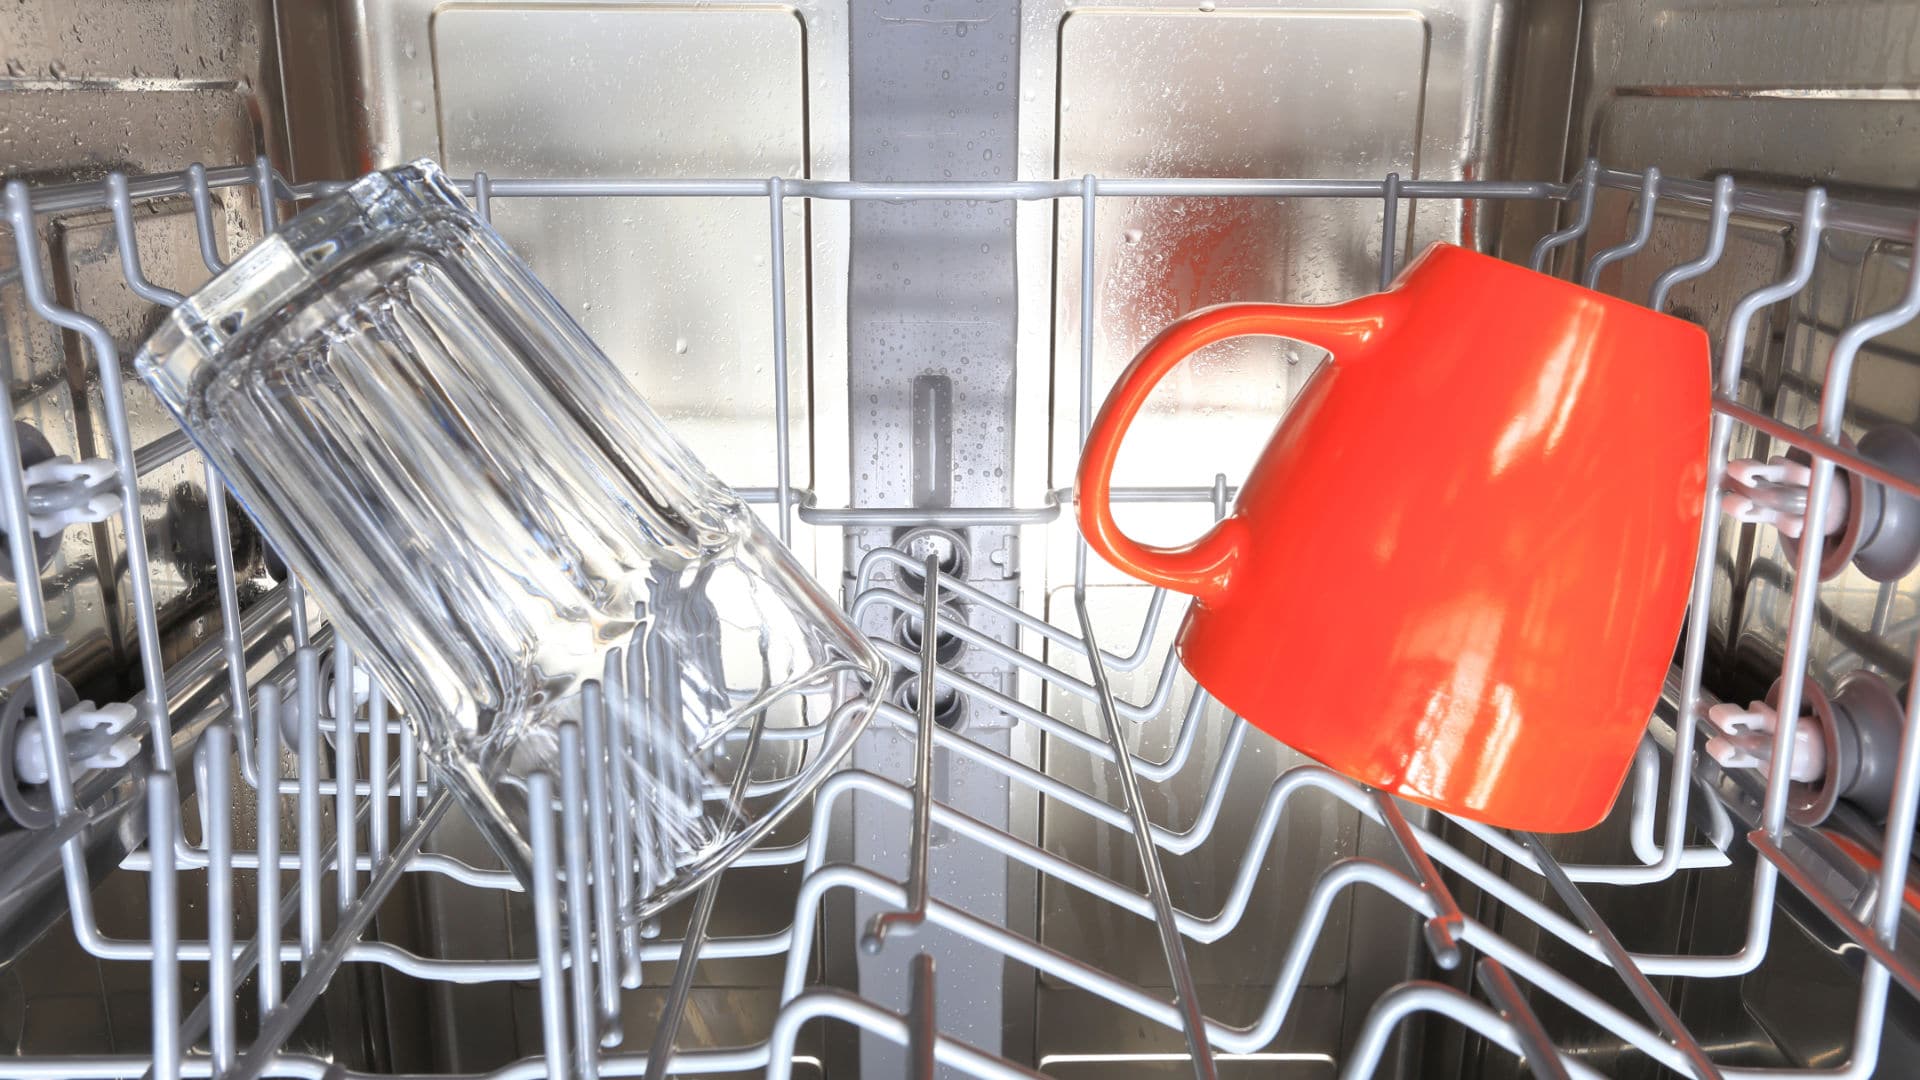 Featured image for “How to Clean a Dishwasher That Stinks”